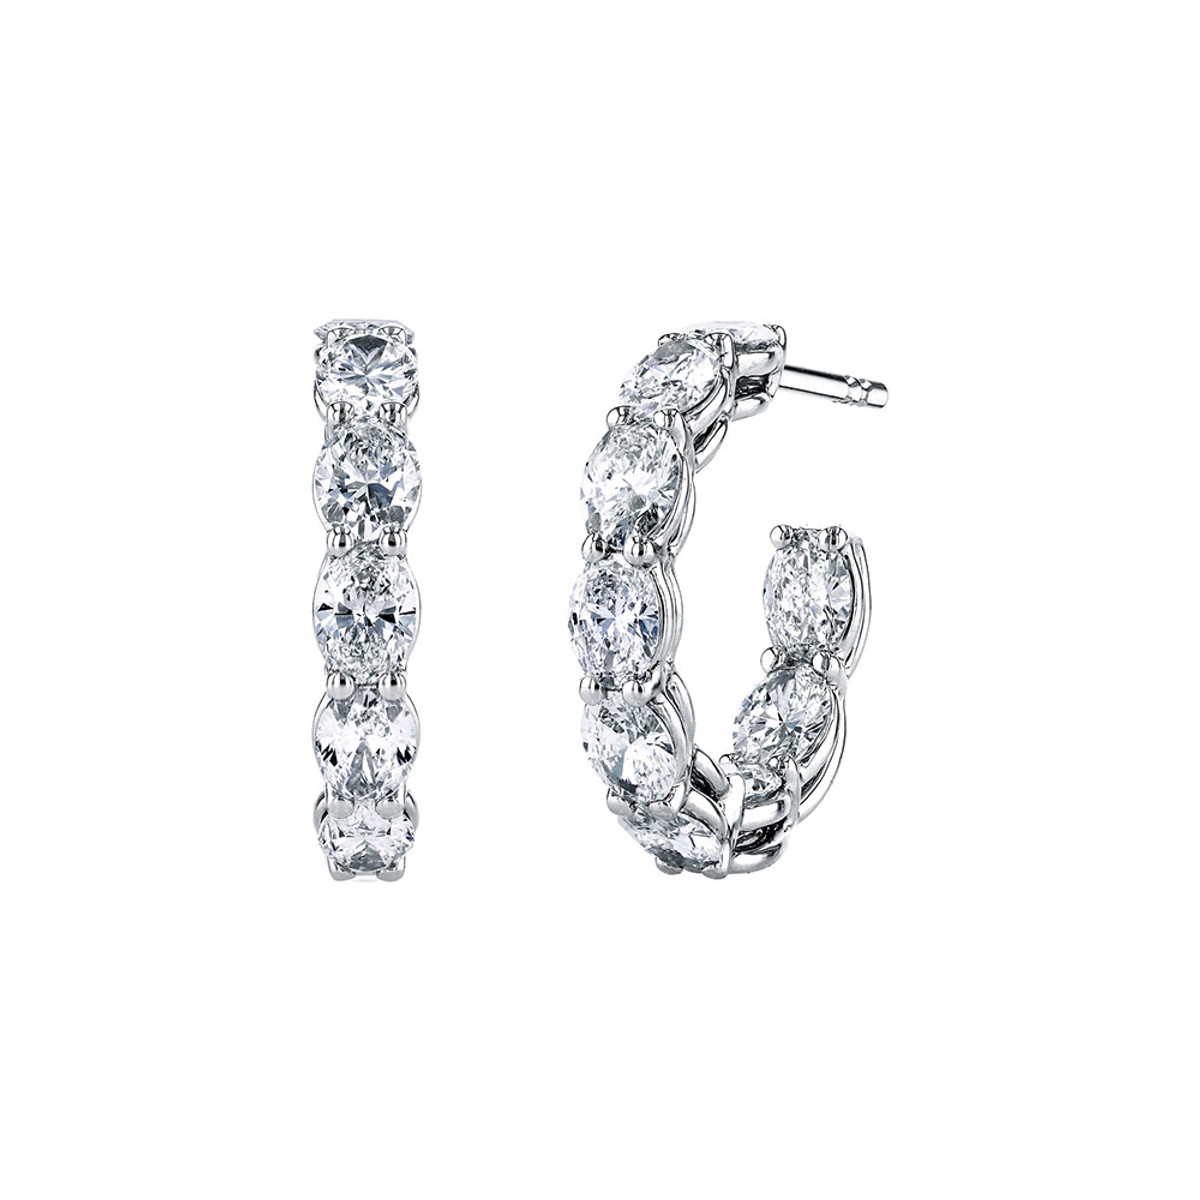 Hyde Park Collection 18K White Gold Diamond Hoop Earrings-59193 Product Image